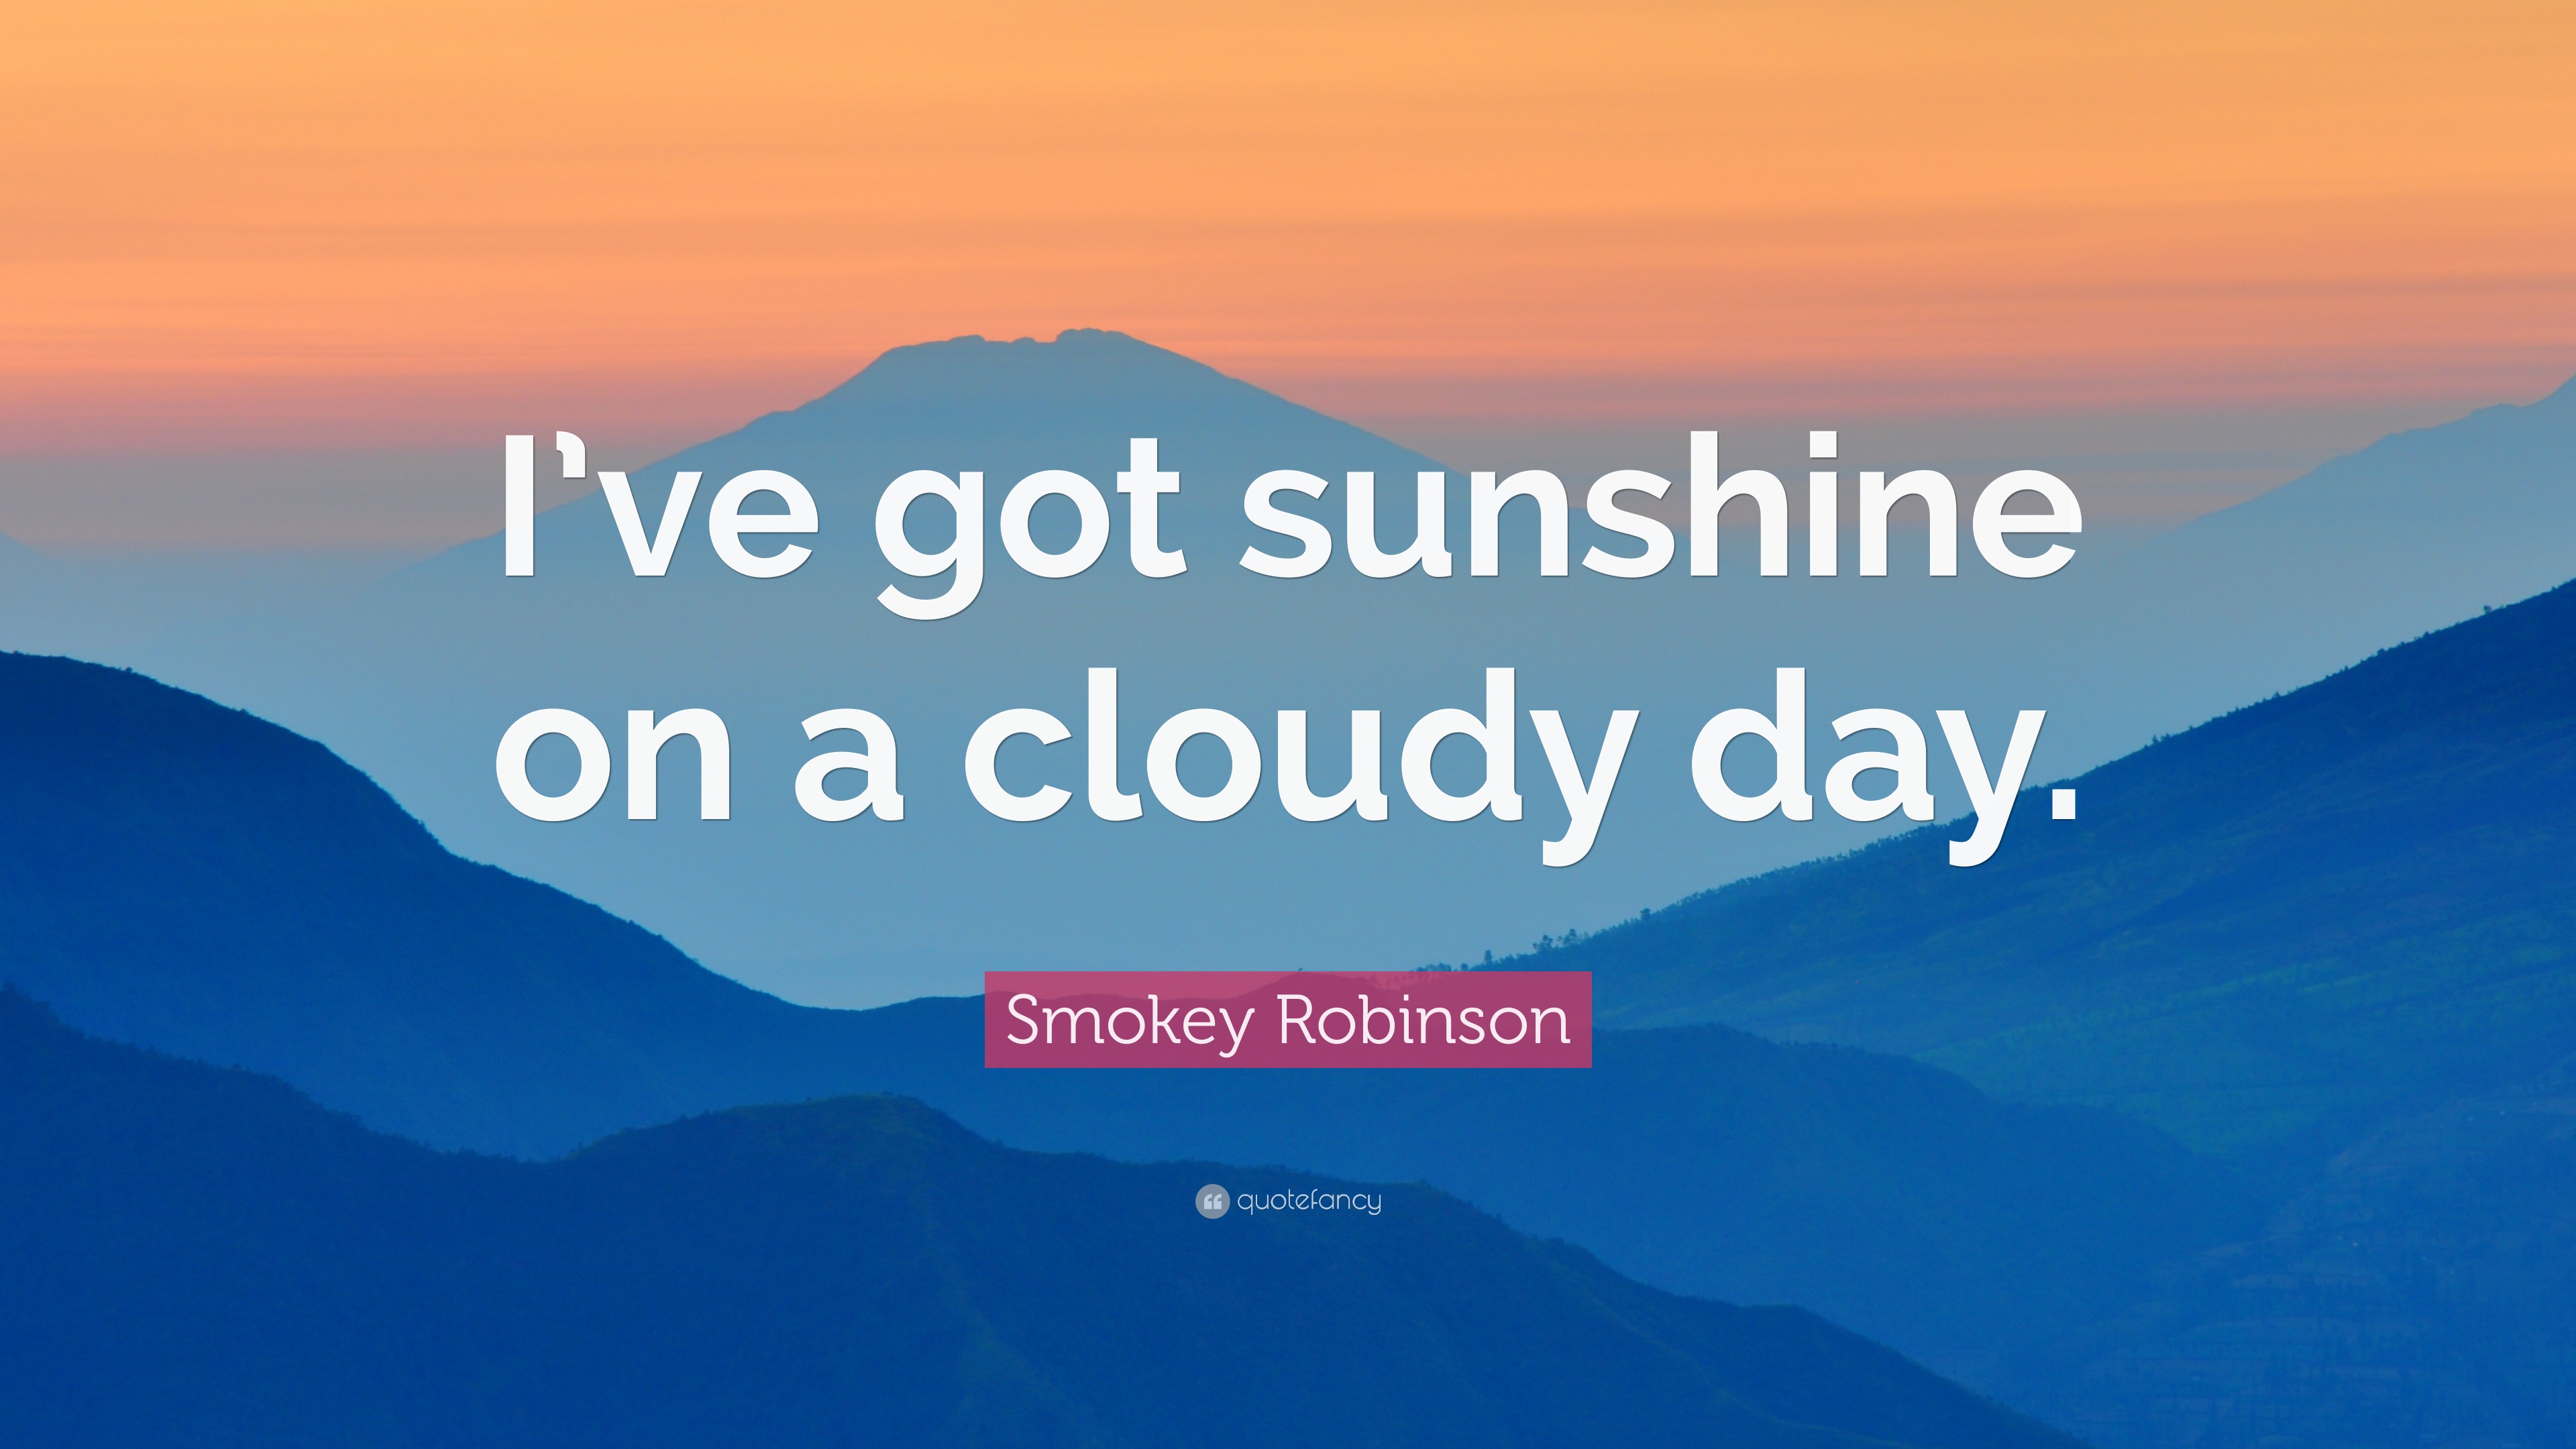 Smokey Robinson Quote: “I've got sunshine on a cloudy day.” 9